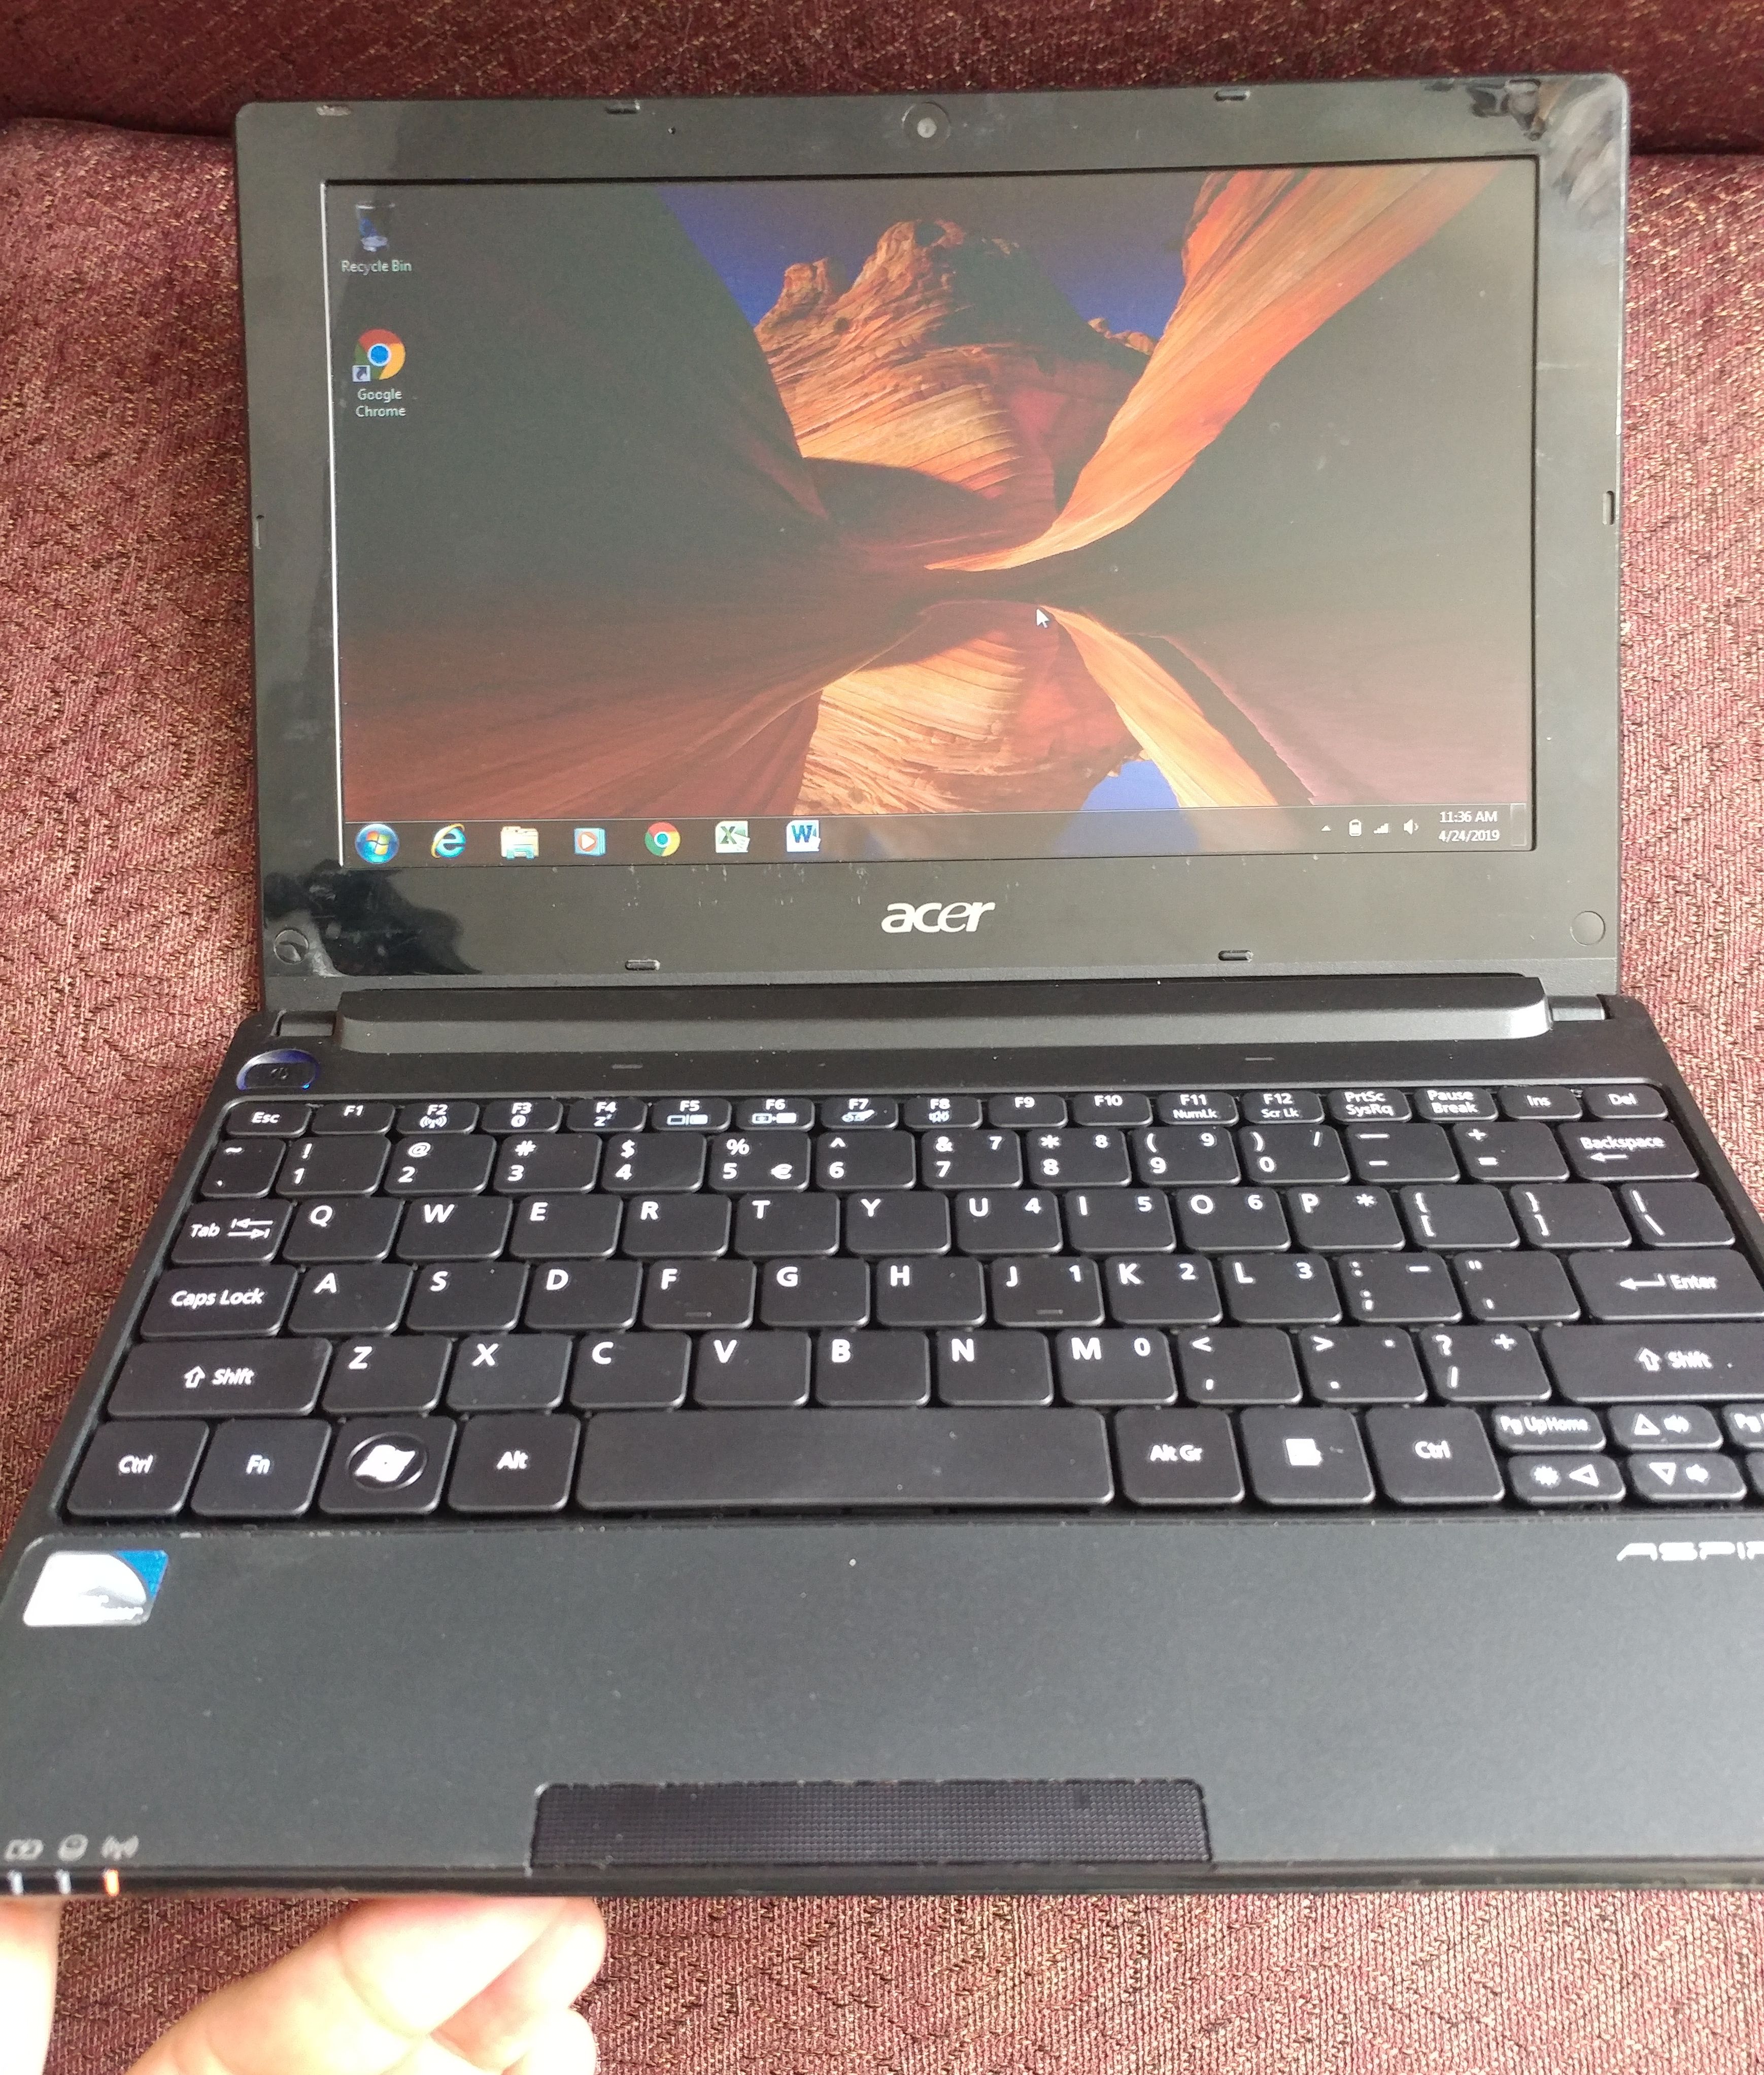 Mini Laptop Notebook Acer Aspire One Excellent Condition, Windows , Office New Charger